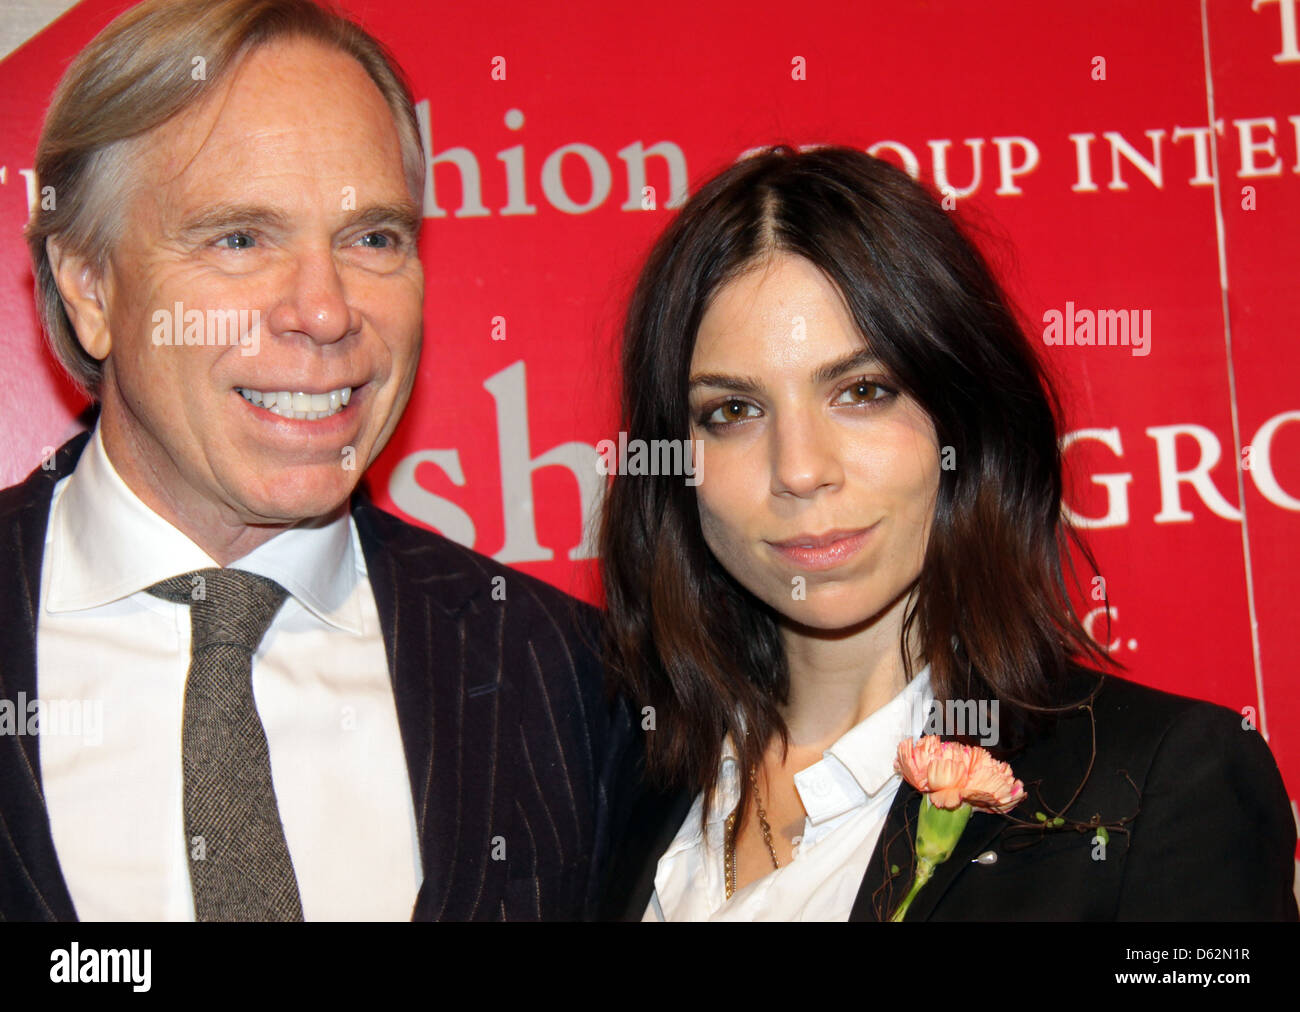 Tommy Hilfiger Ally Hilfiger Fashion Group International Rising Star Awards  at Cipriani nd StreetArrivals and Inside New Stock Photo - Alamy